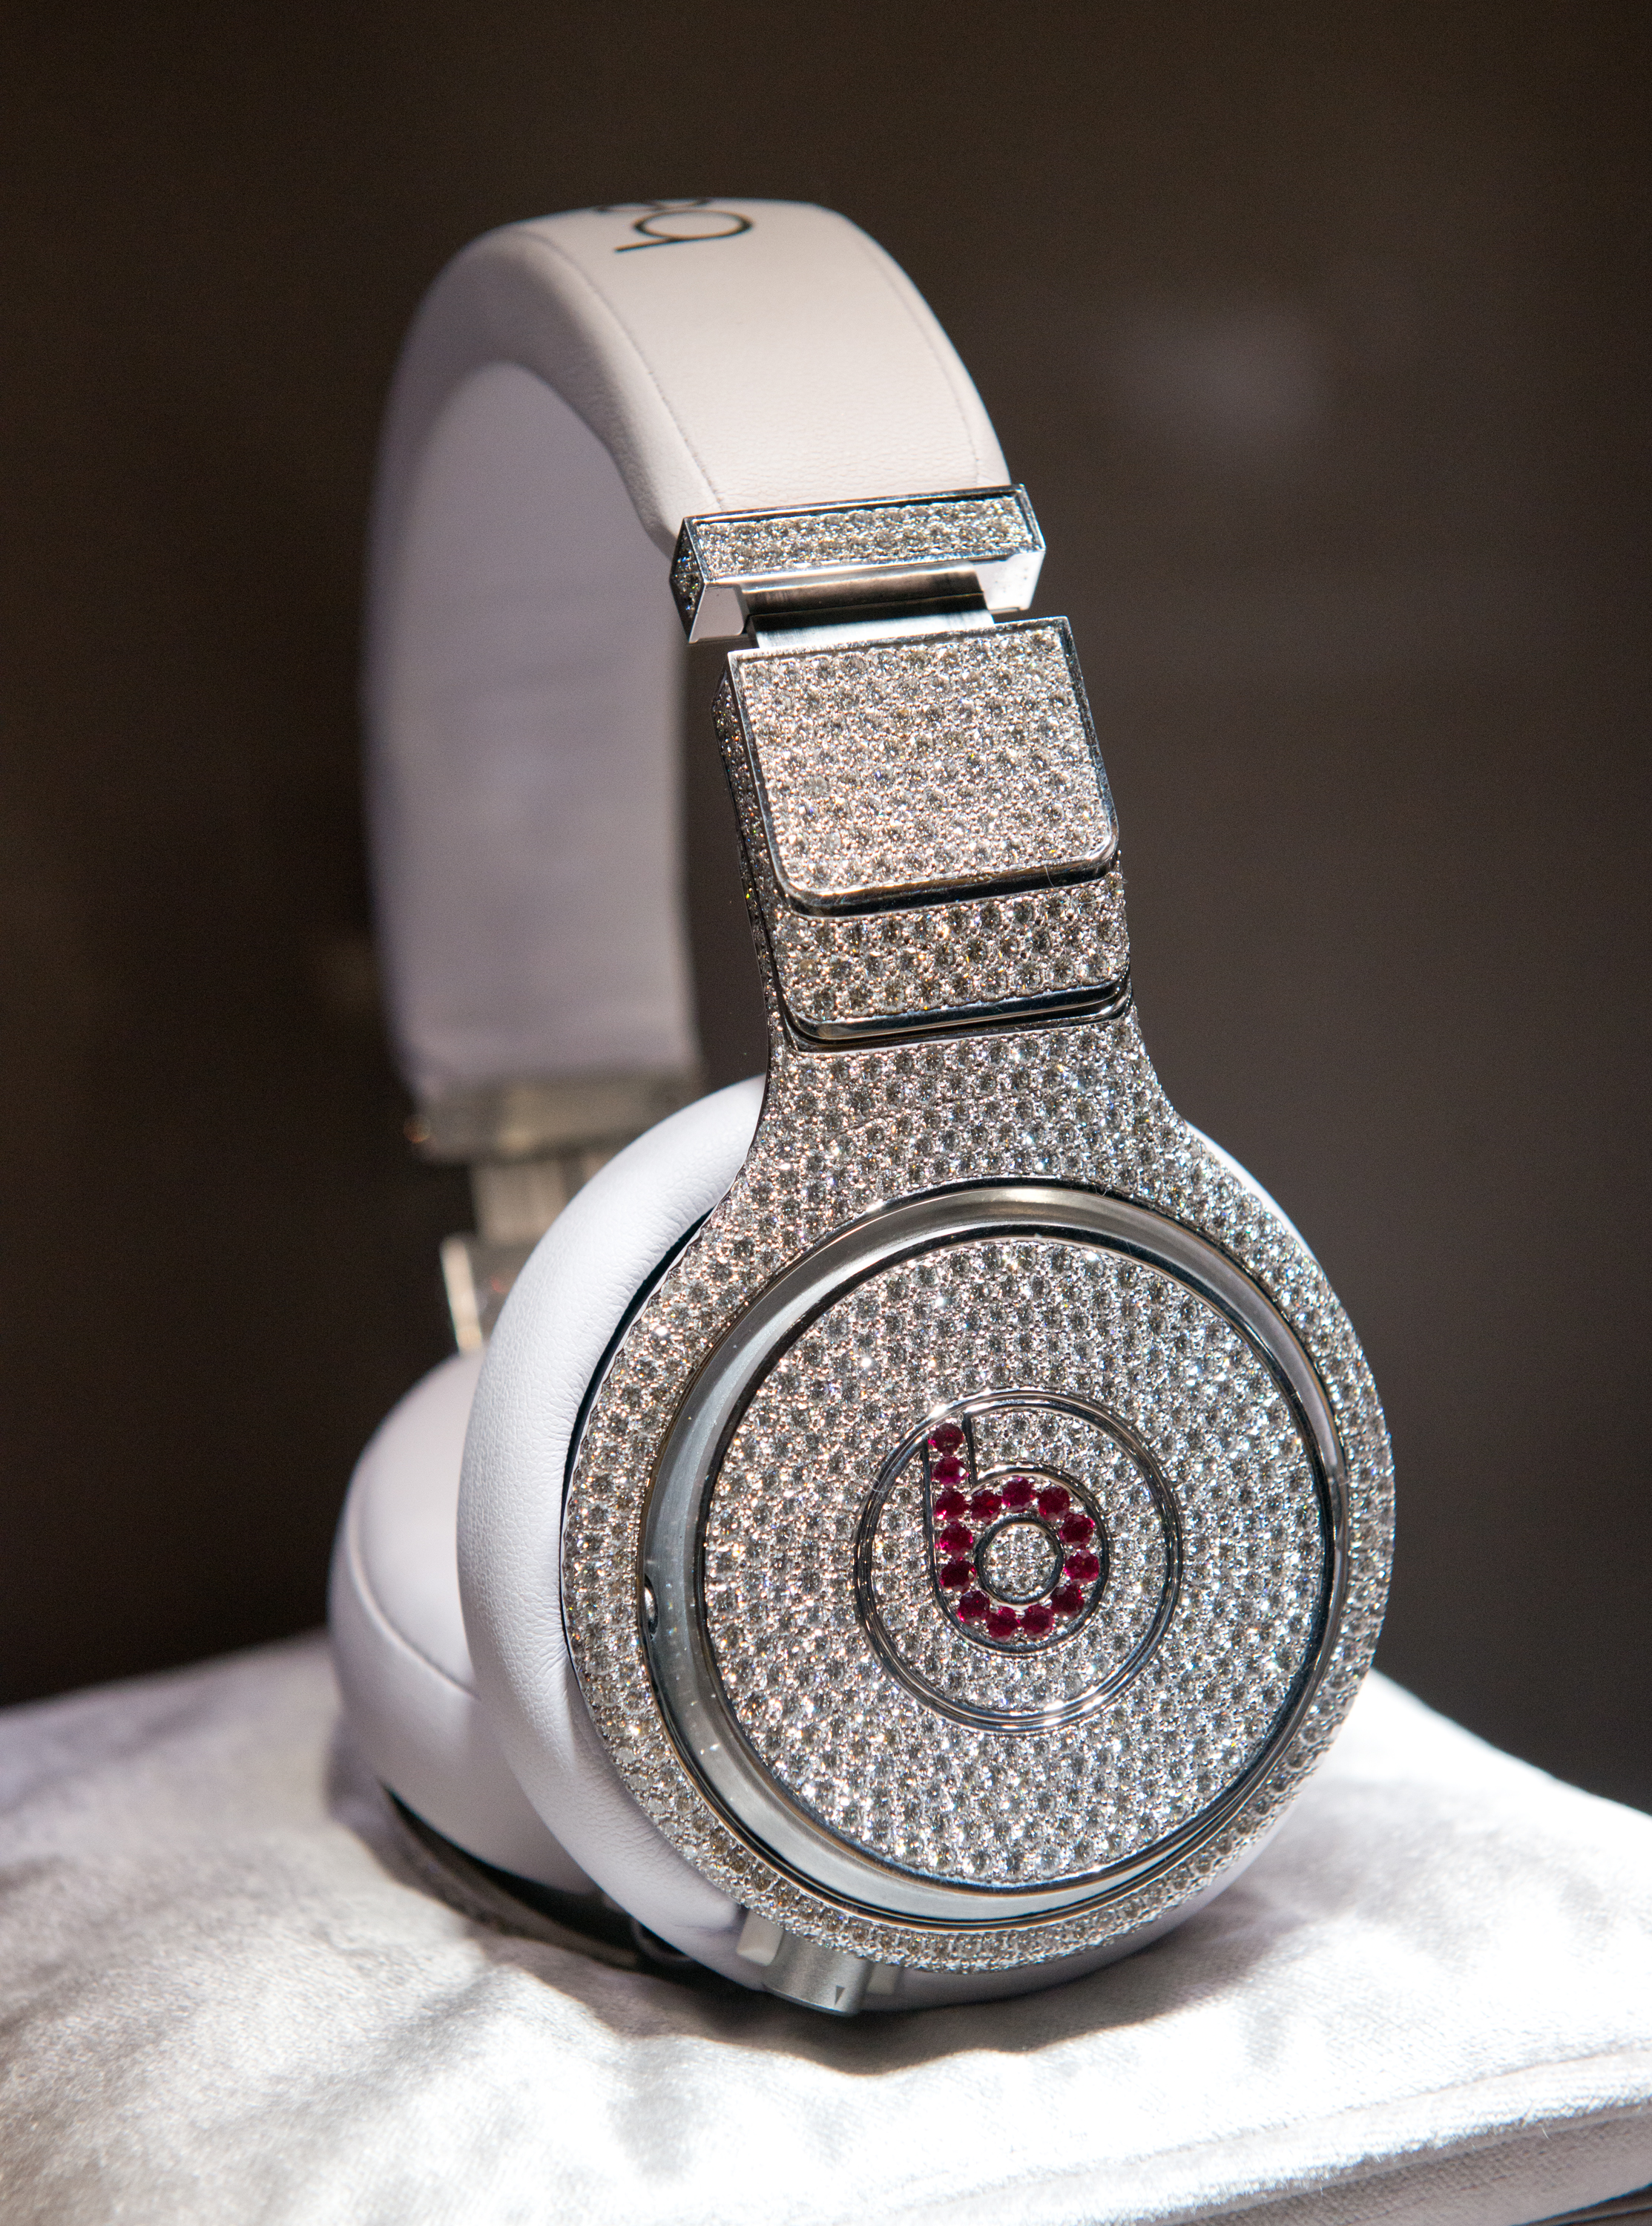 The Million Dollar Headphones by Beats by Dr. Dre &amp;  Graff Diamonds, displayed on January 31, 2014 in New York City. (Noam Galai—2014 Getty Images)